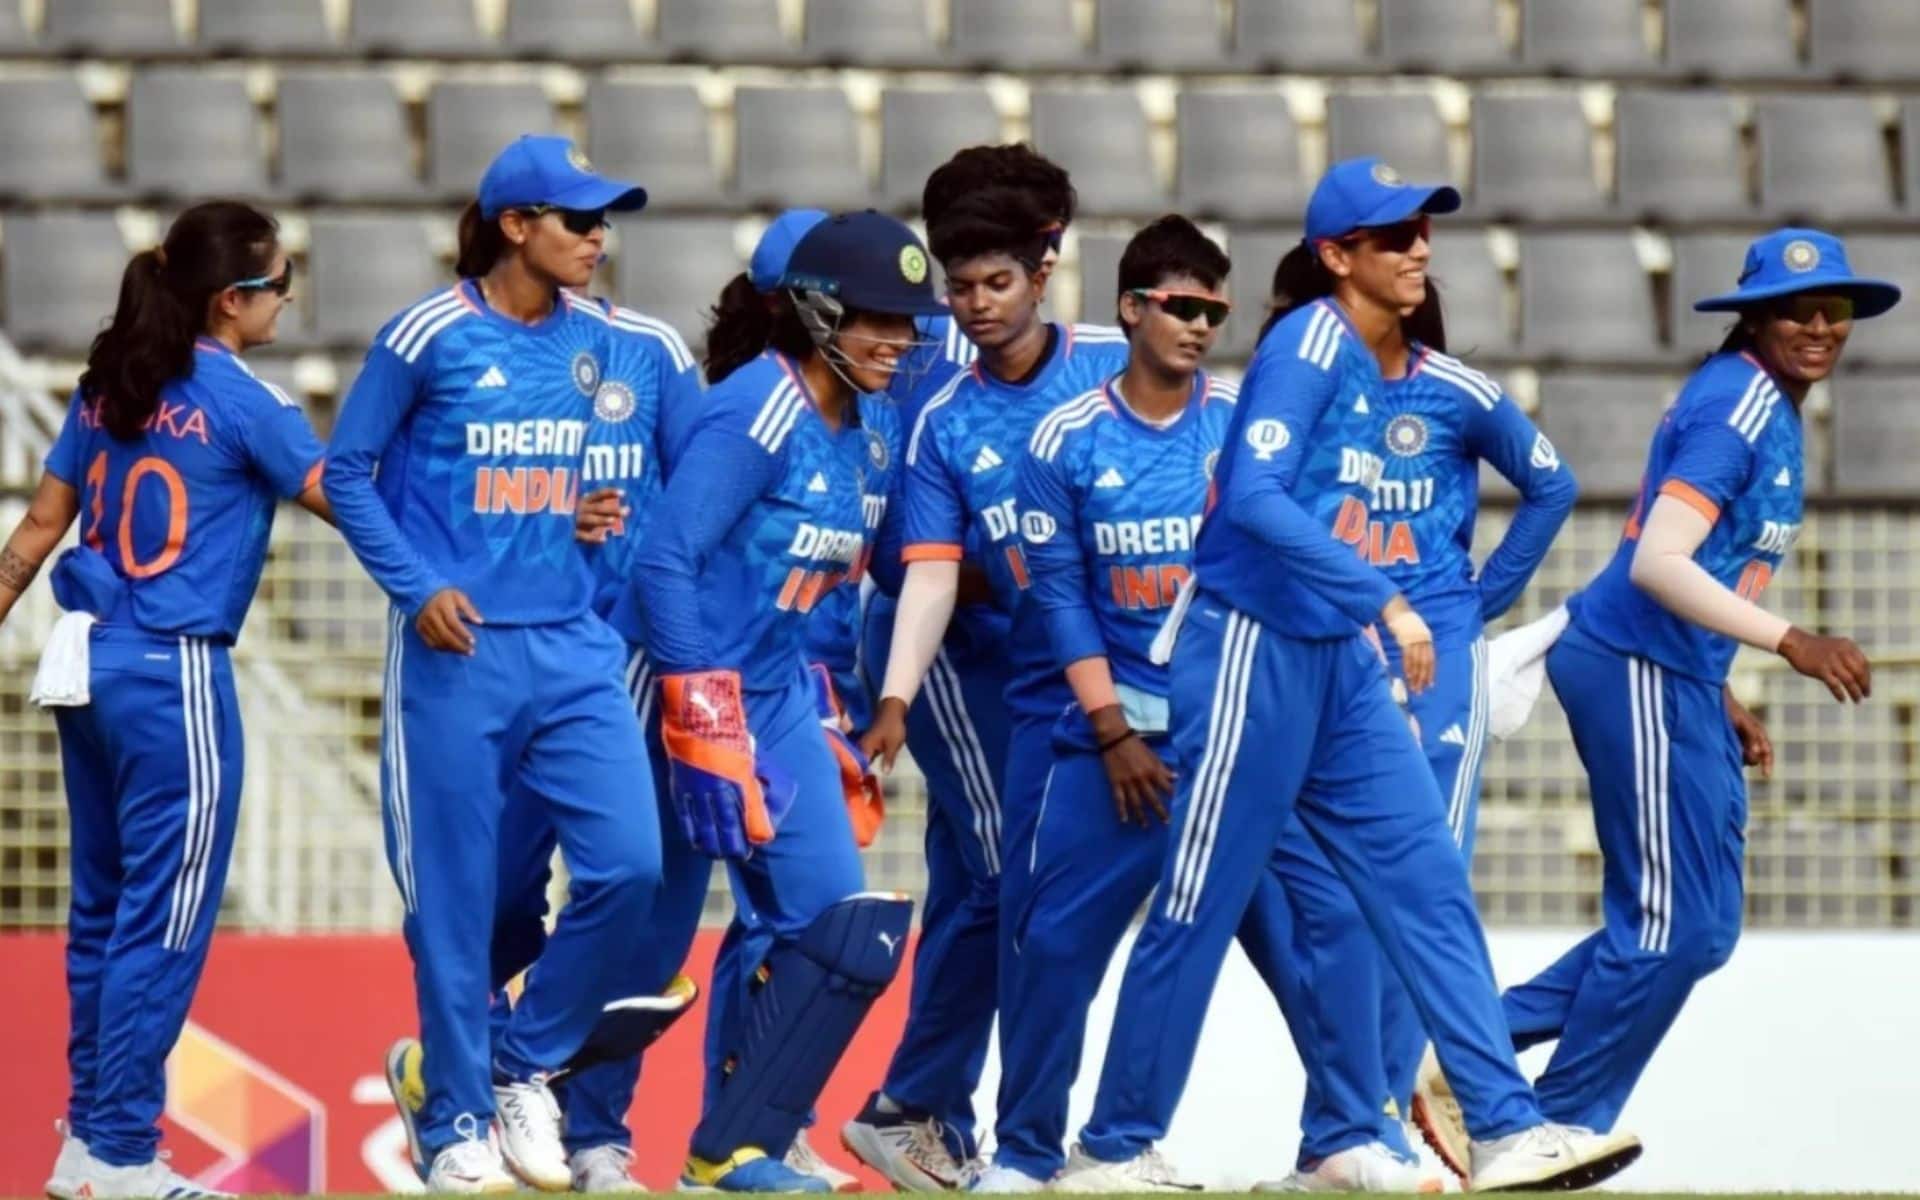 India Women players are currently in Bangladesh (BCB)